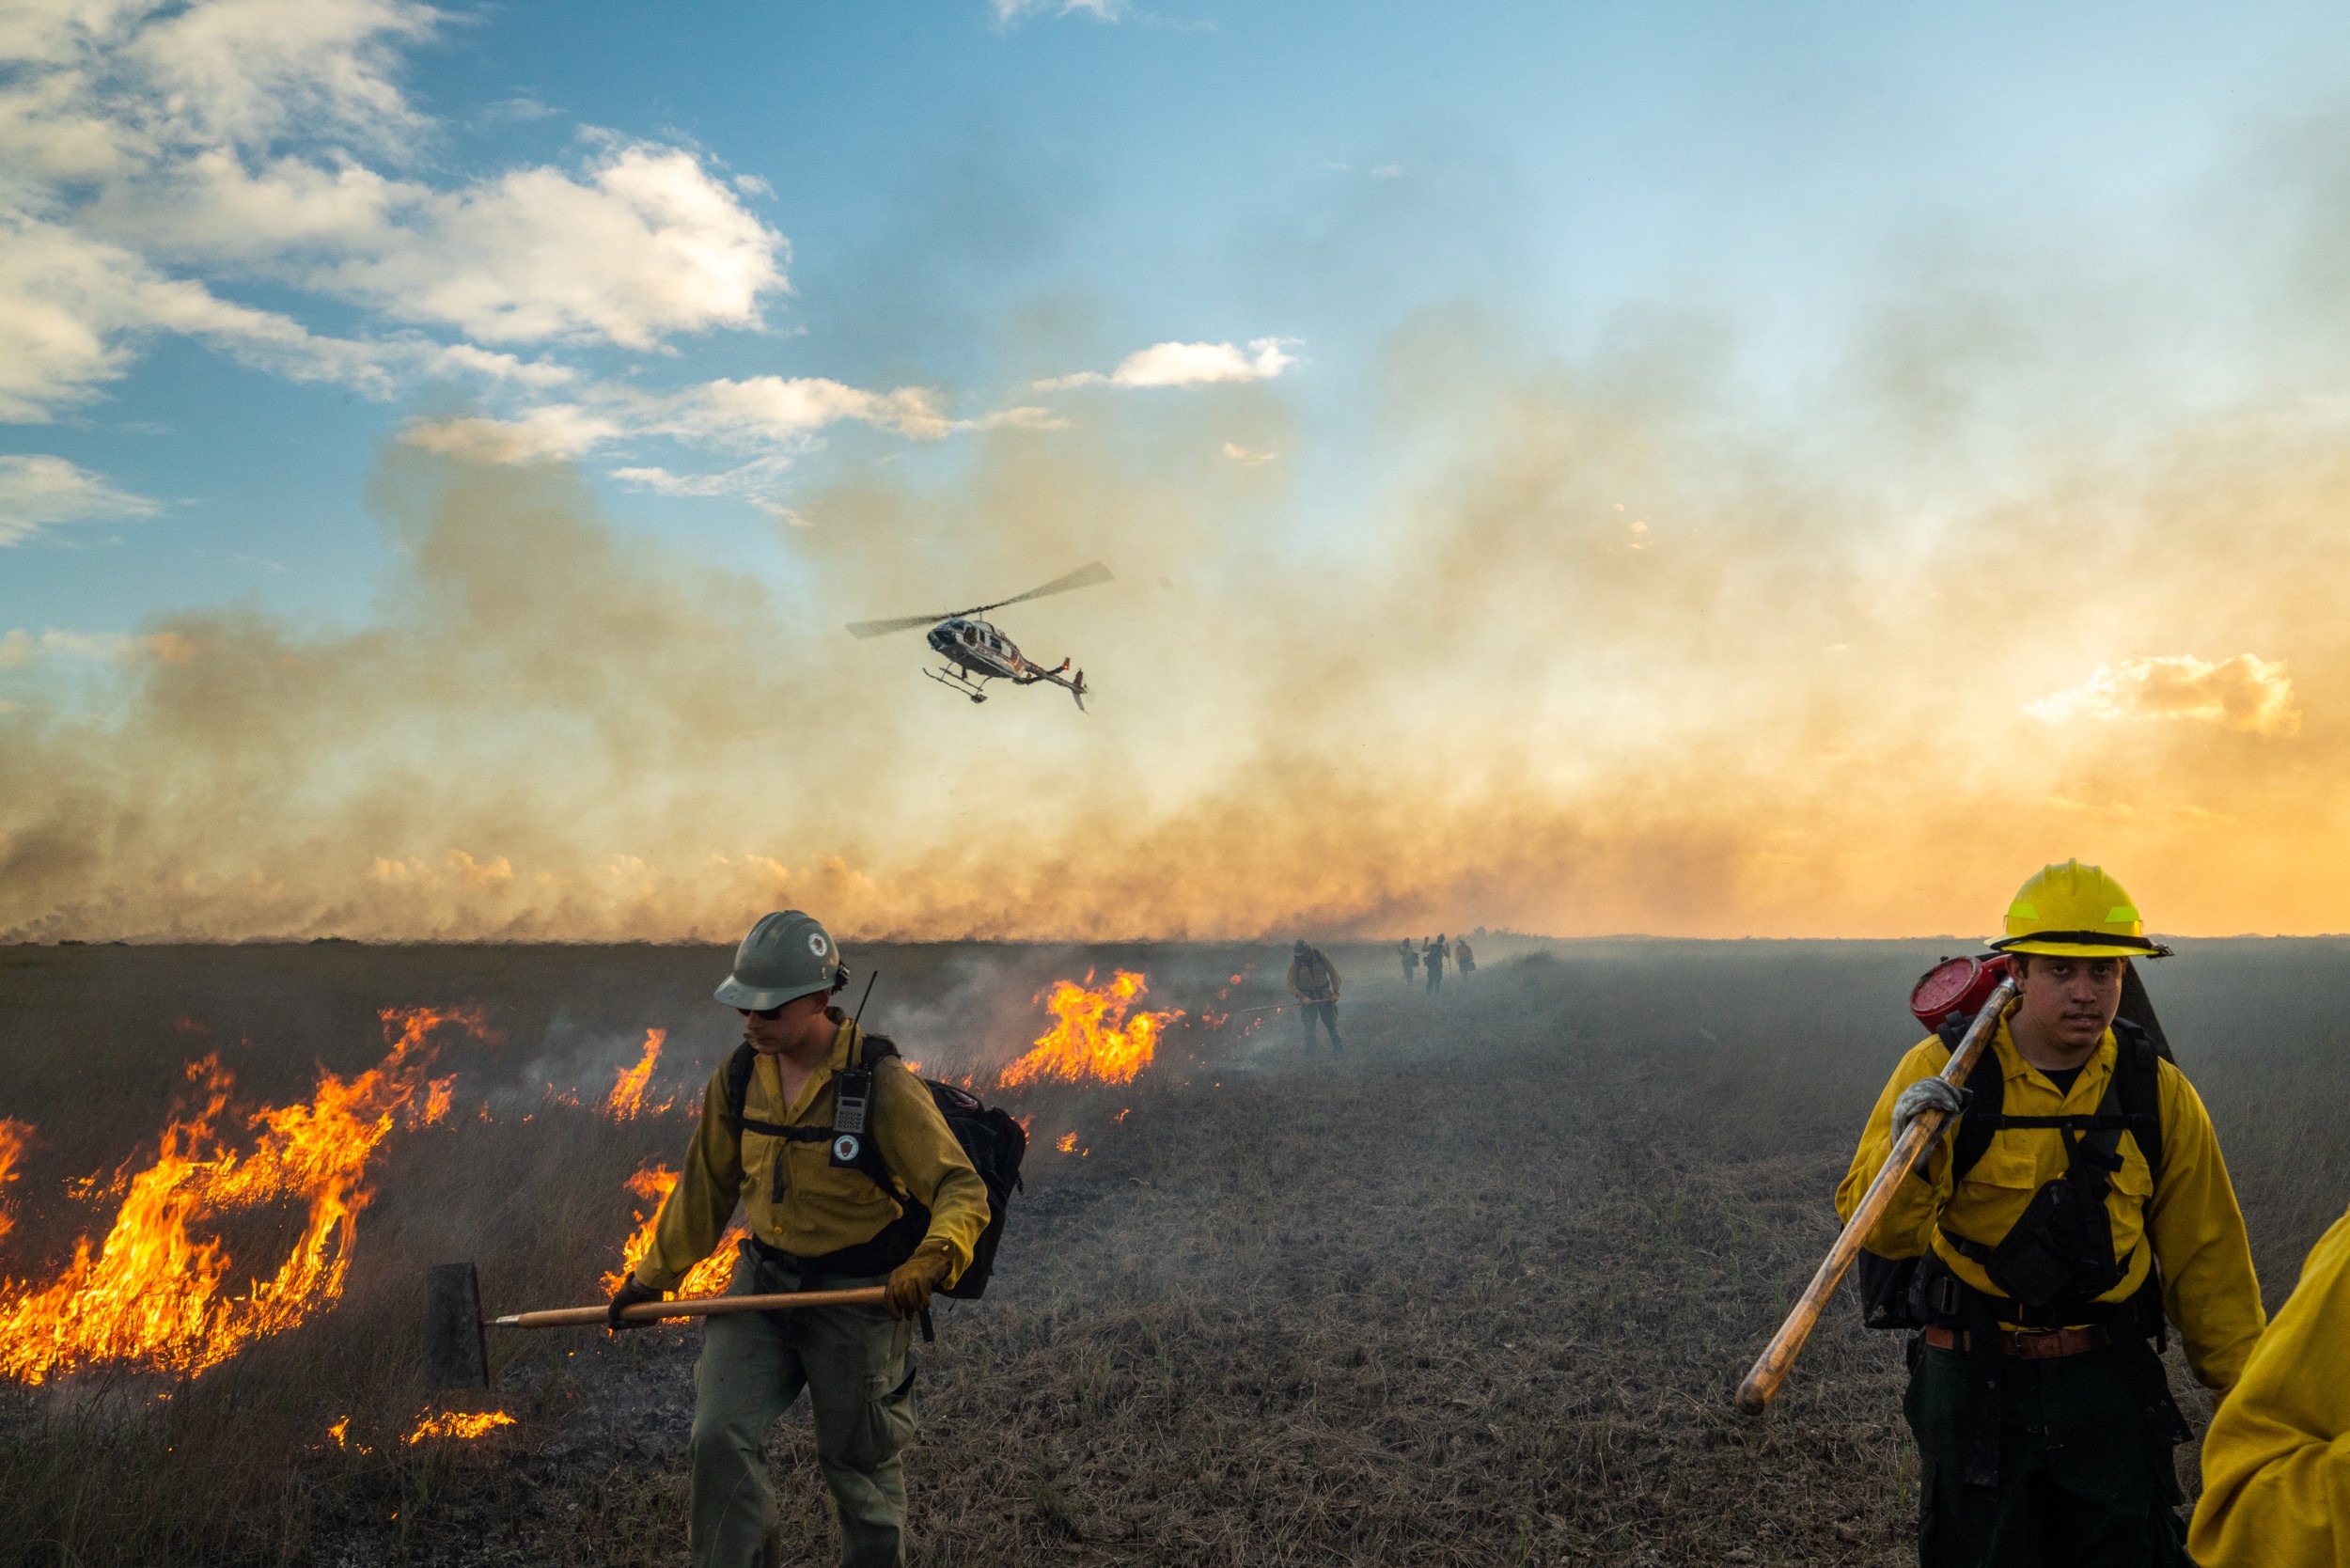 Two firefighters wearing safety gear and carrying tools walk away from a line of flames as a helicopter hovers close to the ground in the distance.